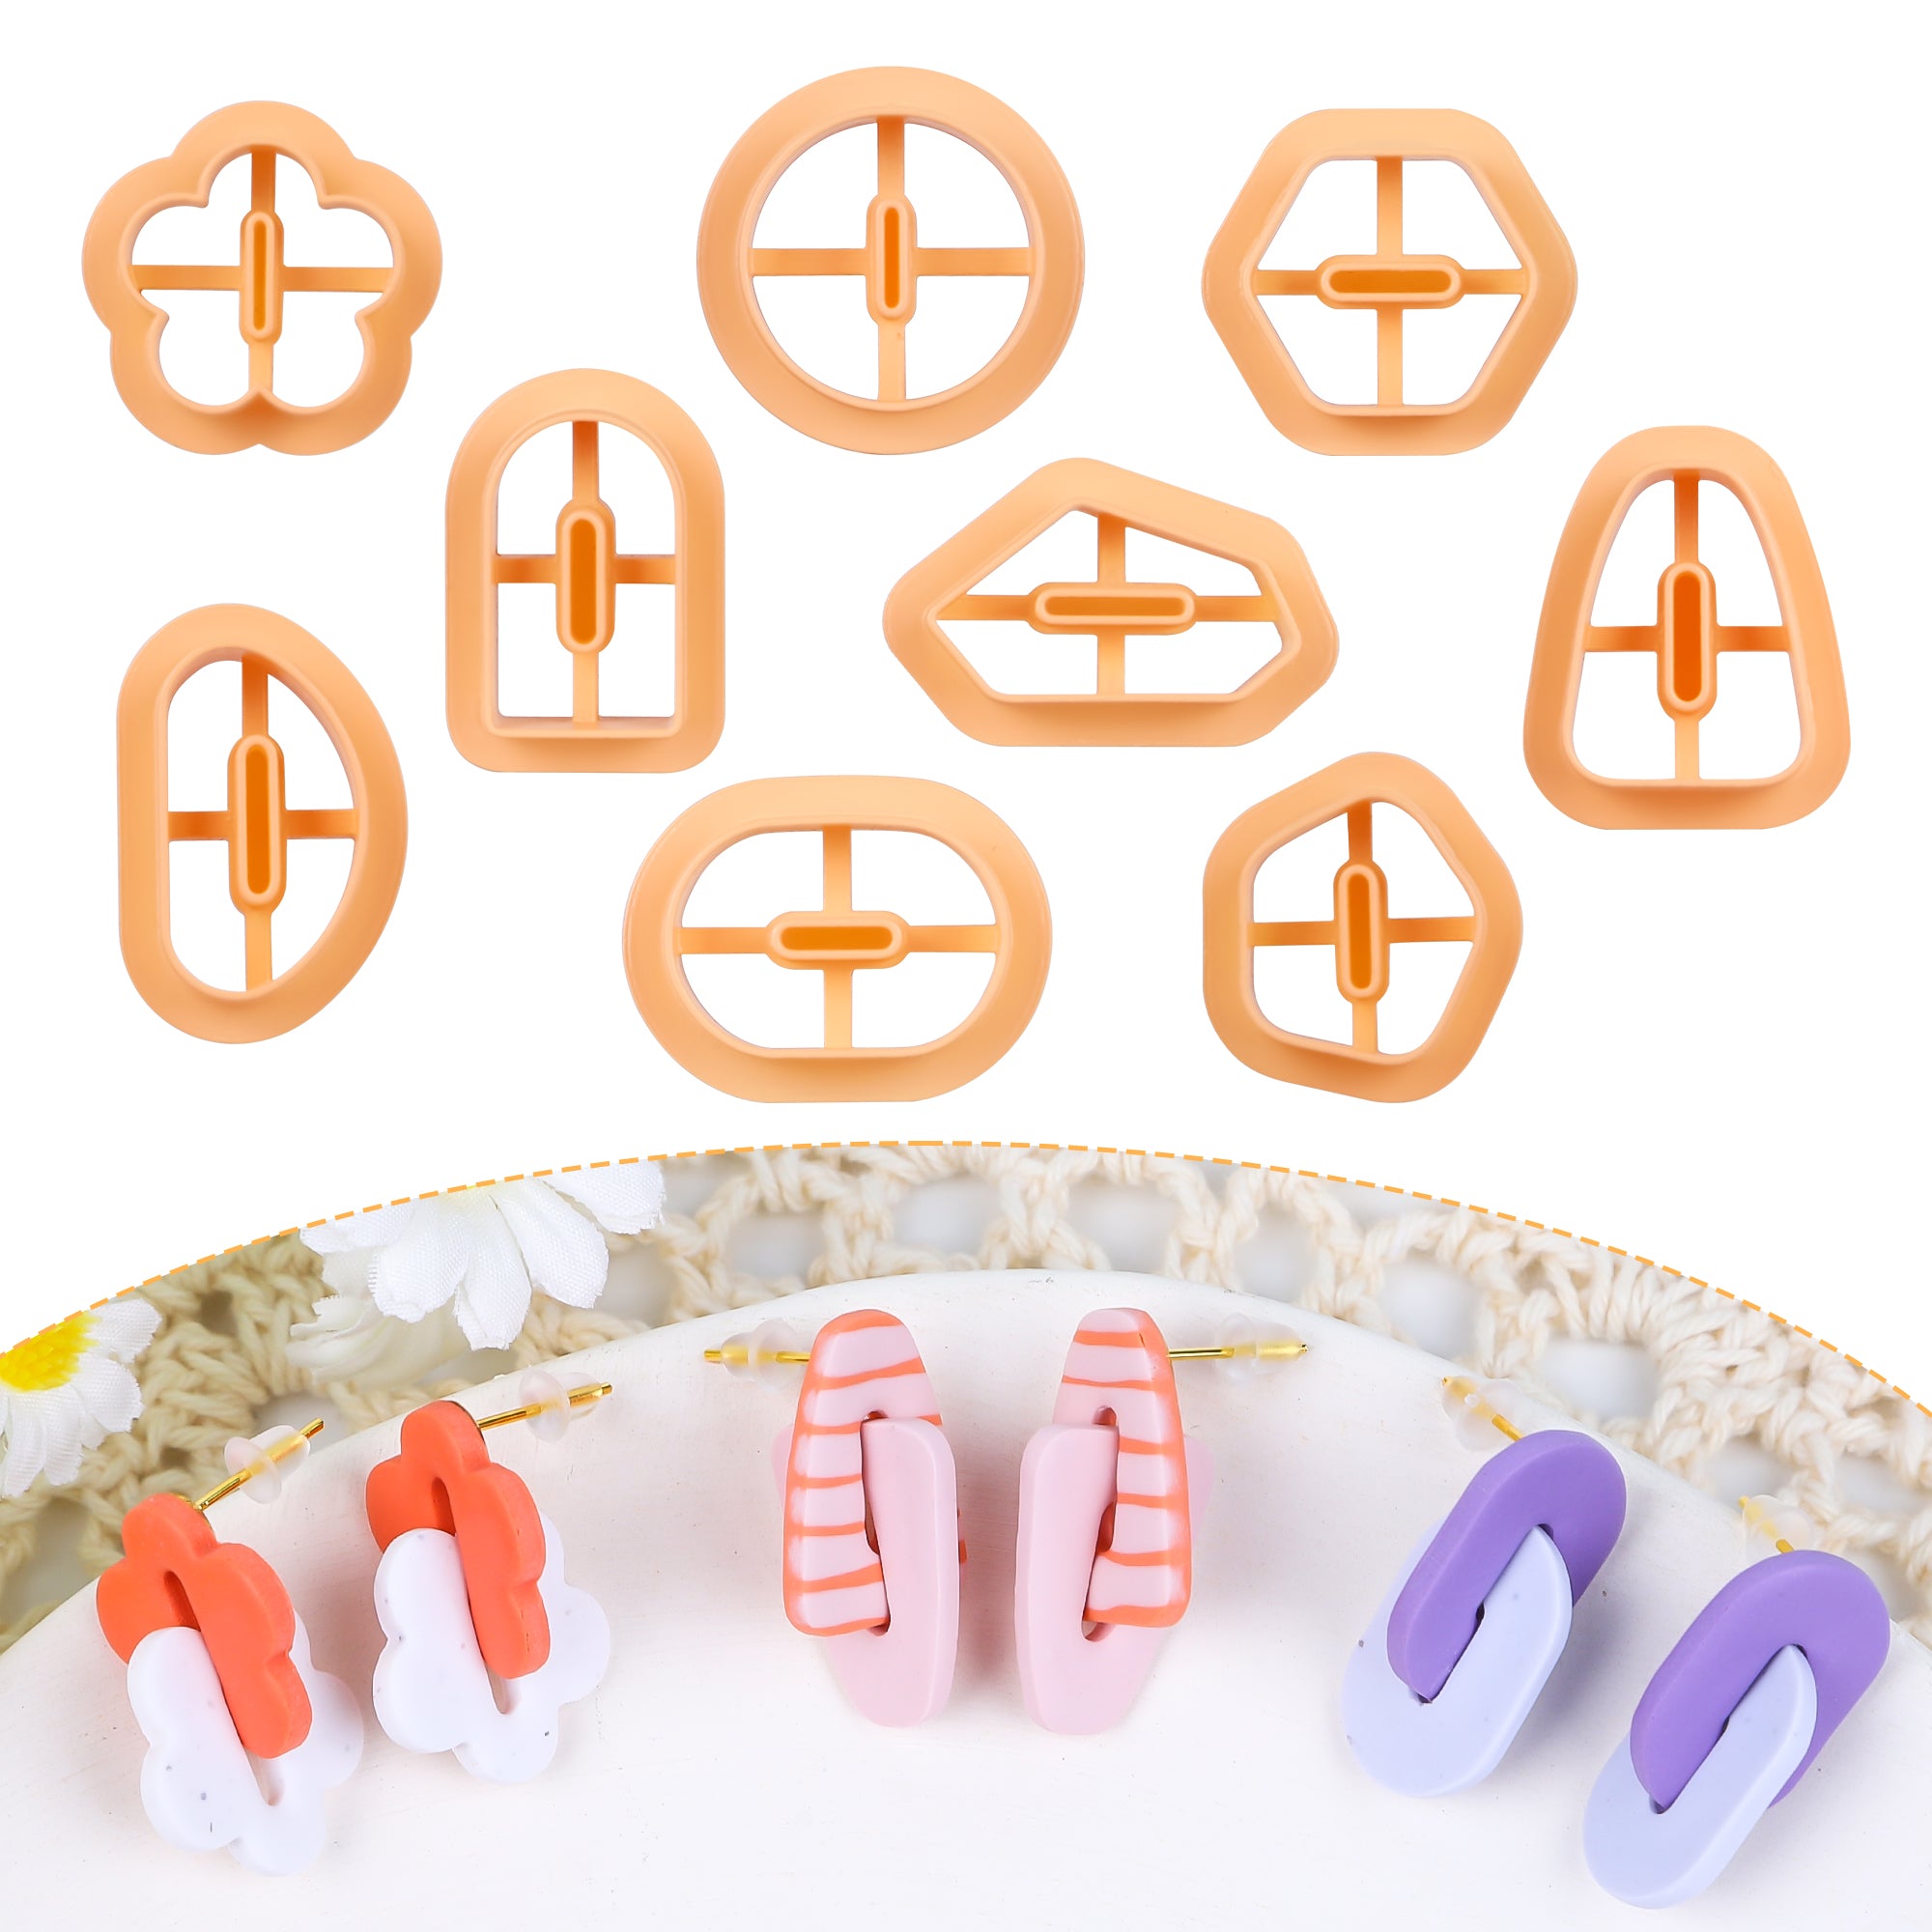 Puocaon Asymmetric Chain Link Clay Cutters 9 Pcs